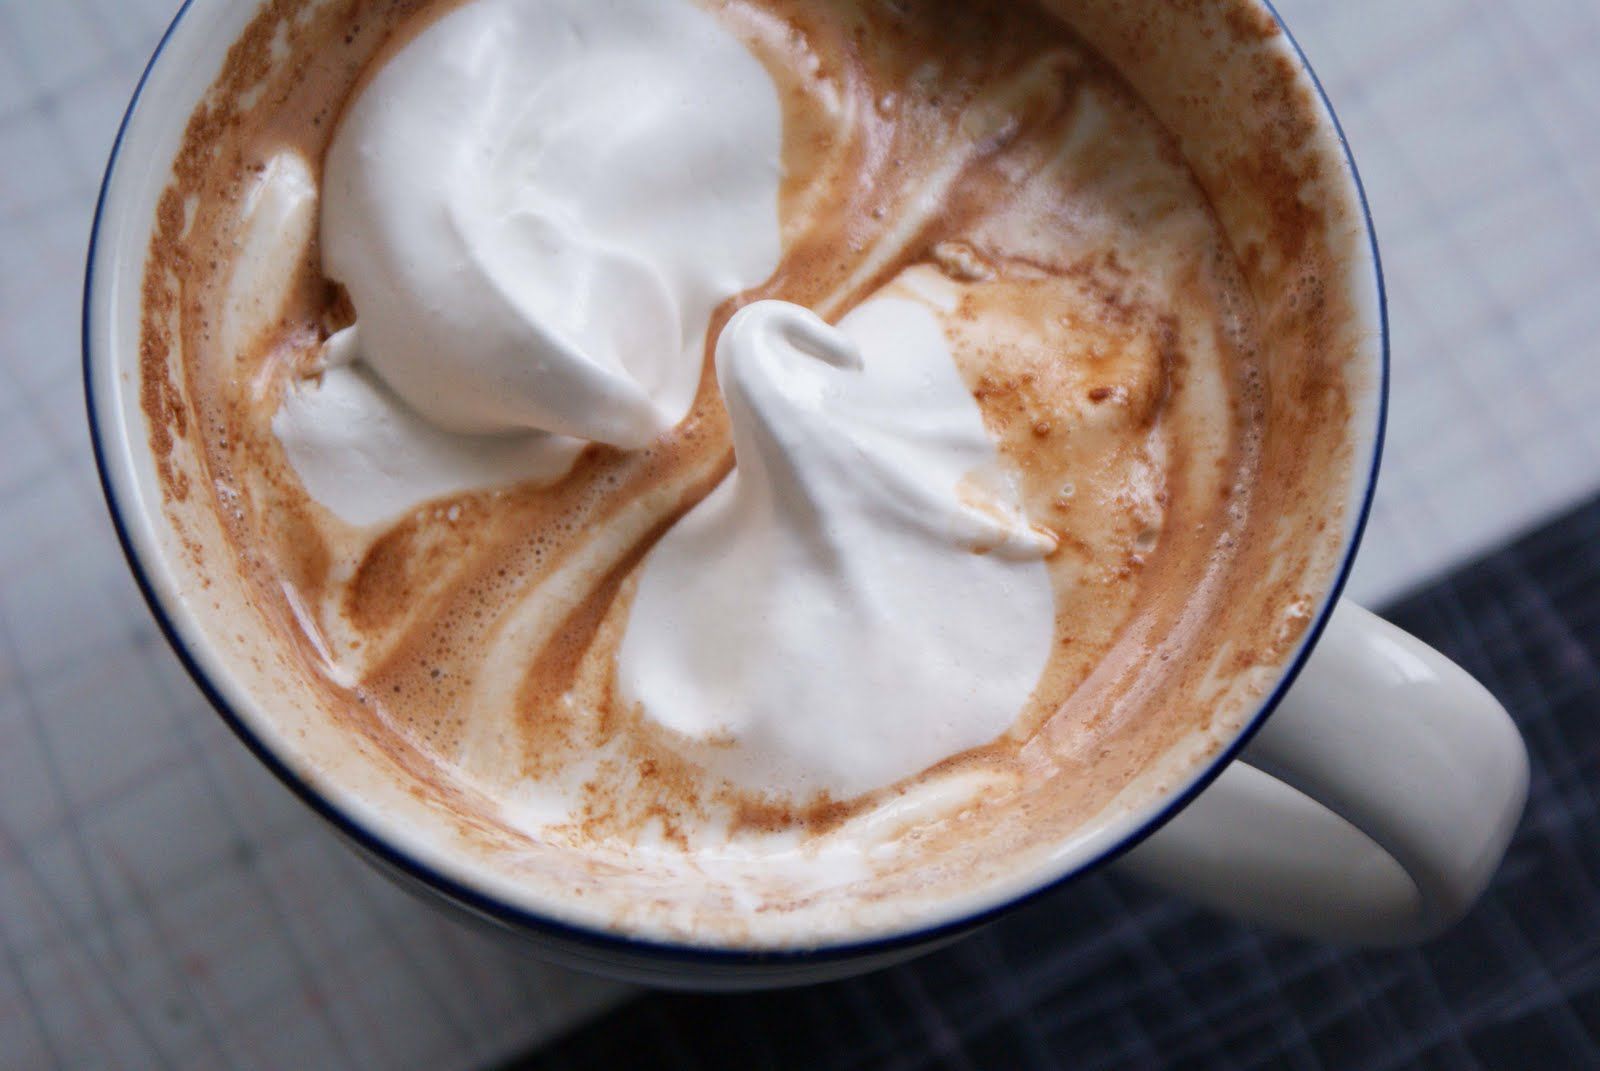 Polar Express Hot Chocolate Recipe (aka the BEST hot chocolate you’ve ever tasted)